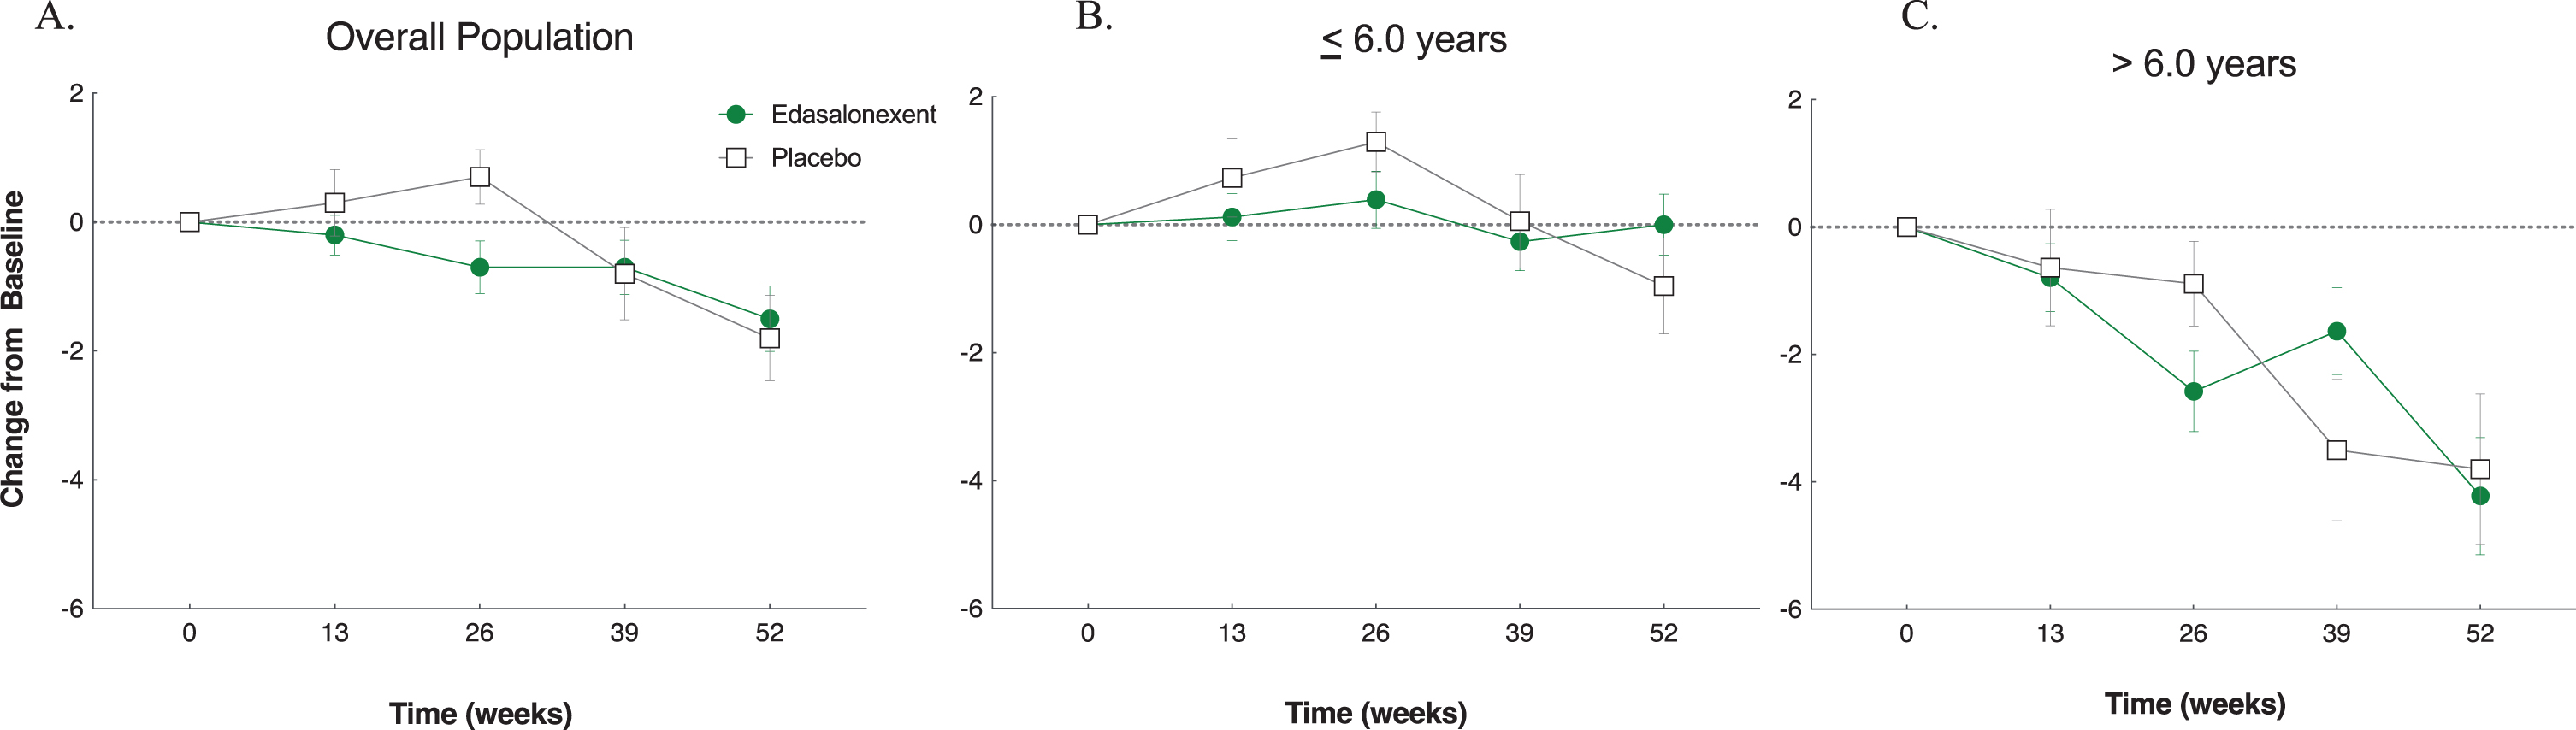 NSAA Total Score (mean±SE) change from baseline overall population (A) and by age group for patients ≤6.0 years (B) and > 6.0 years (C).